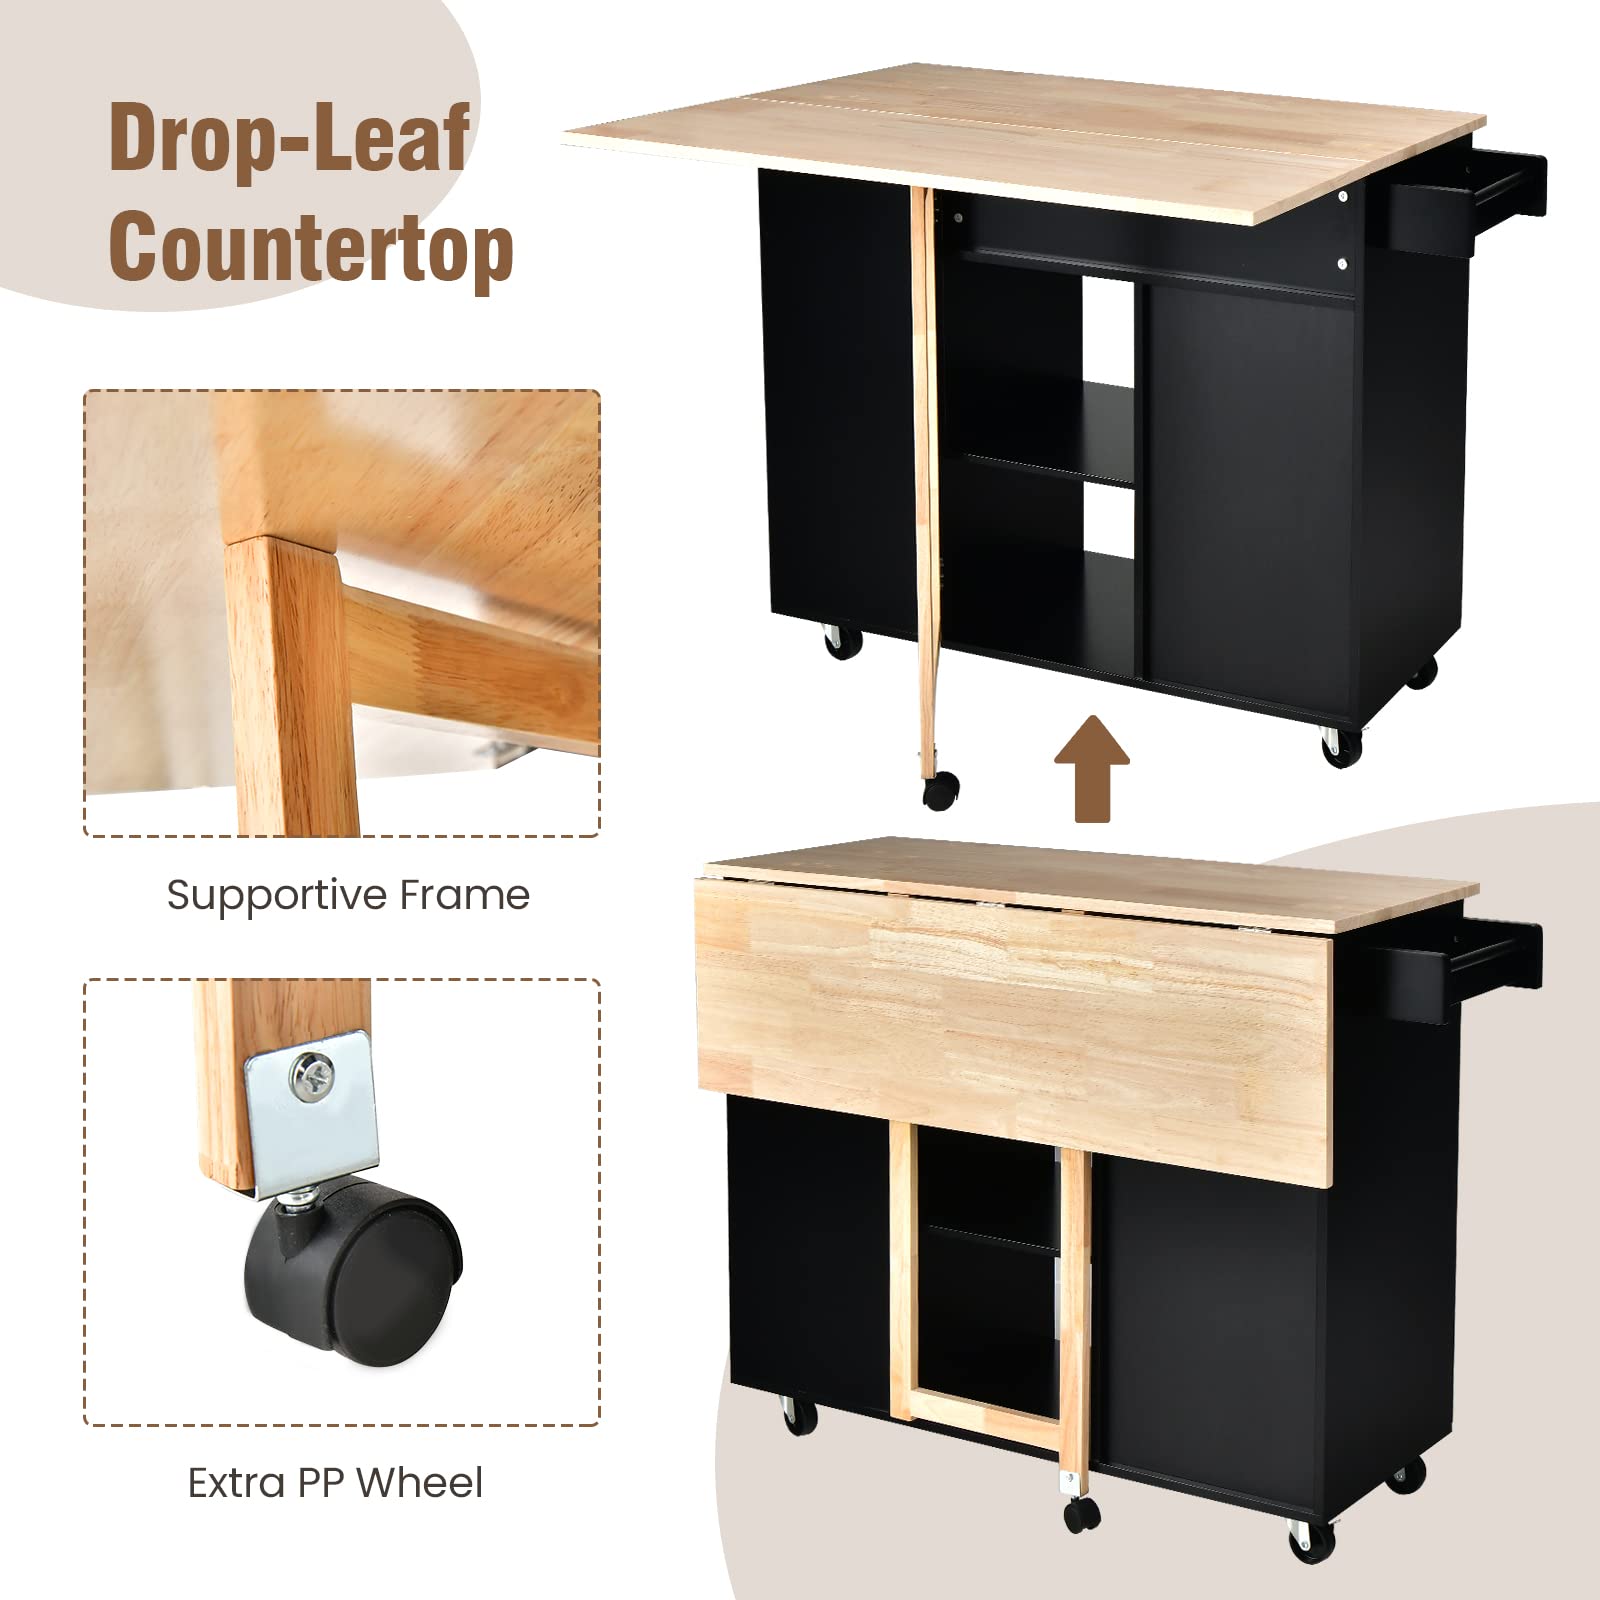 Giantex Kitchen Island Cart Drop-Leaf Countertop, Rubber Wood Breakfast Dining Table w/Large Drawer